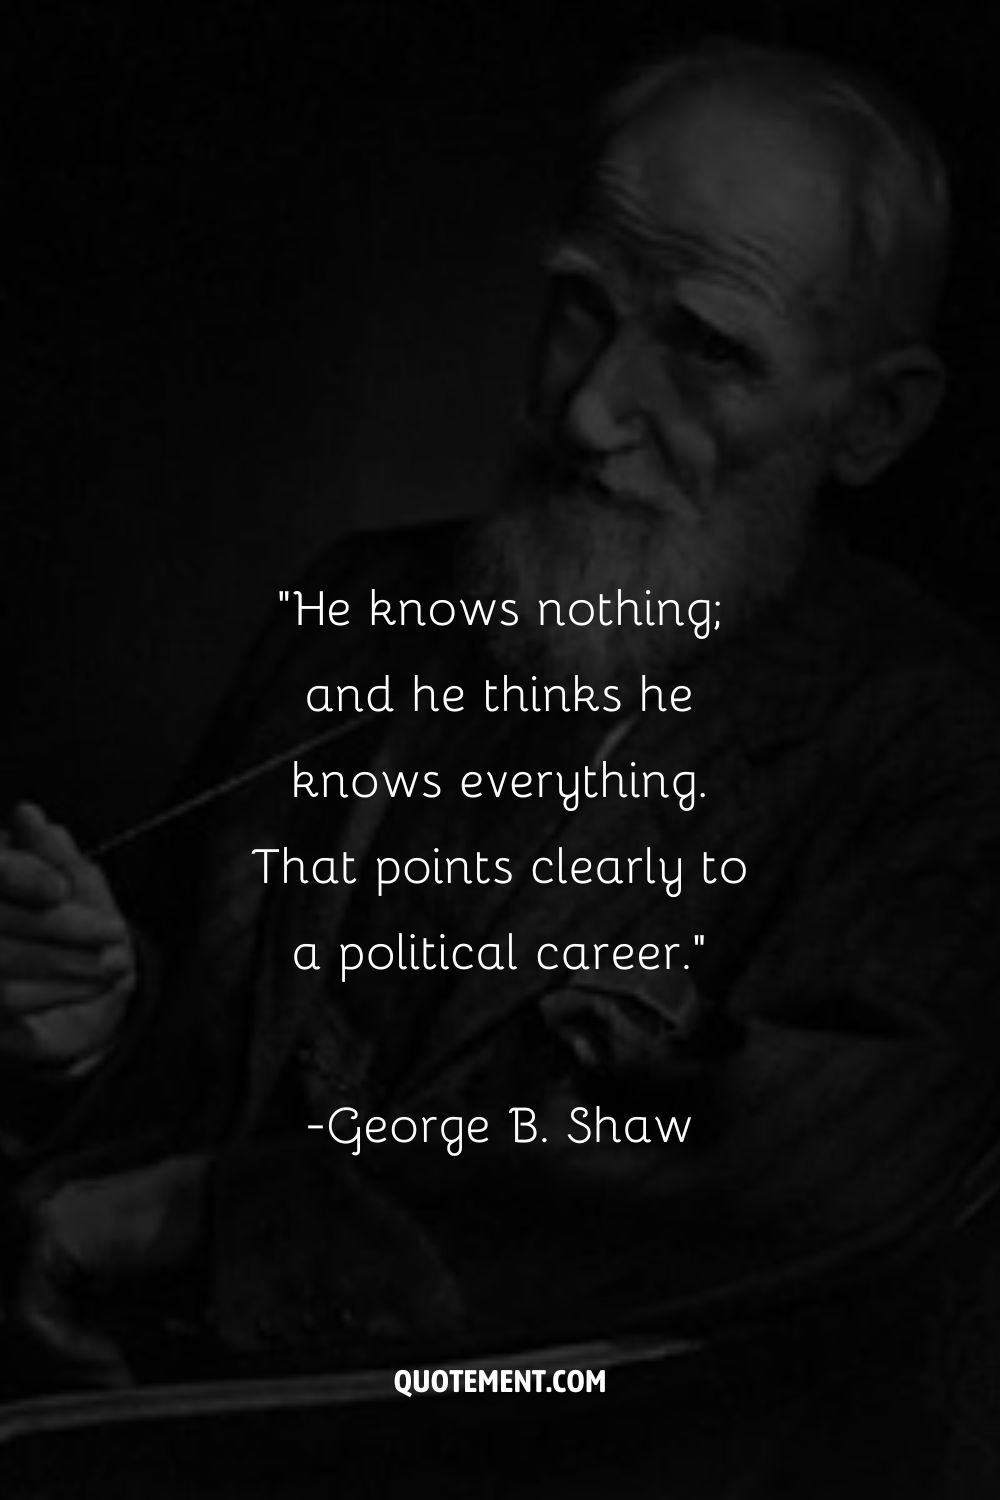 “He knows nothing; and he thinks he knows everything. That points clearly to a political career.”